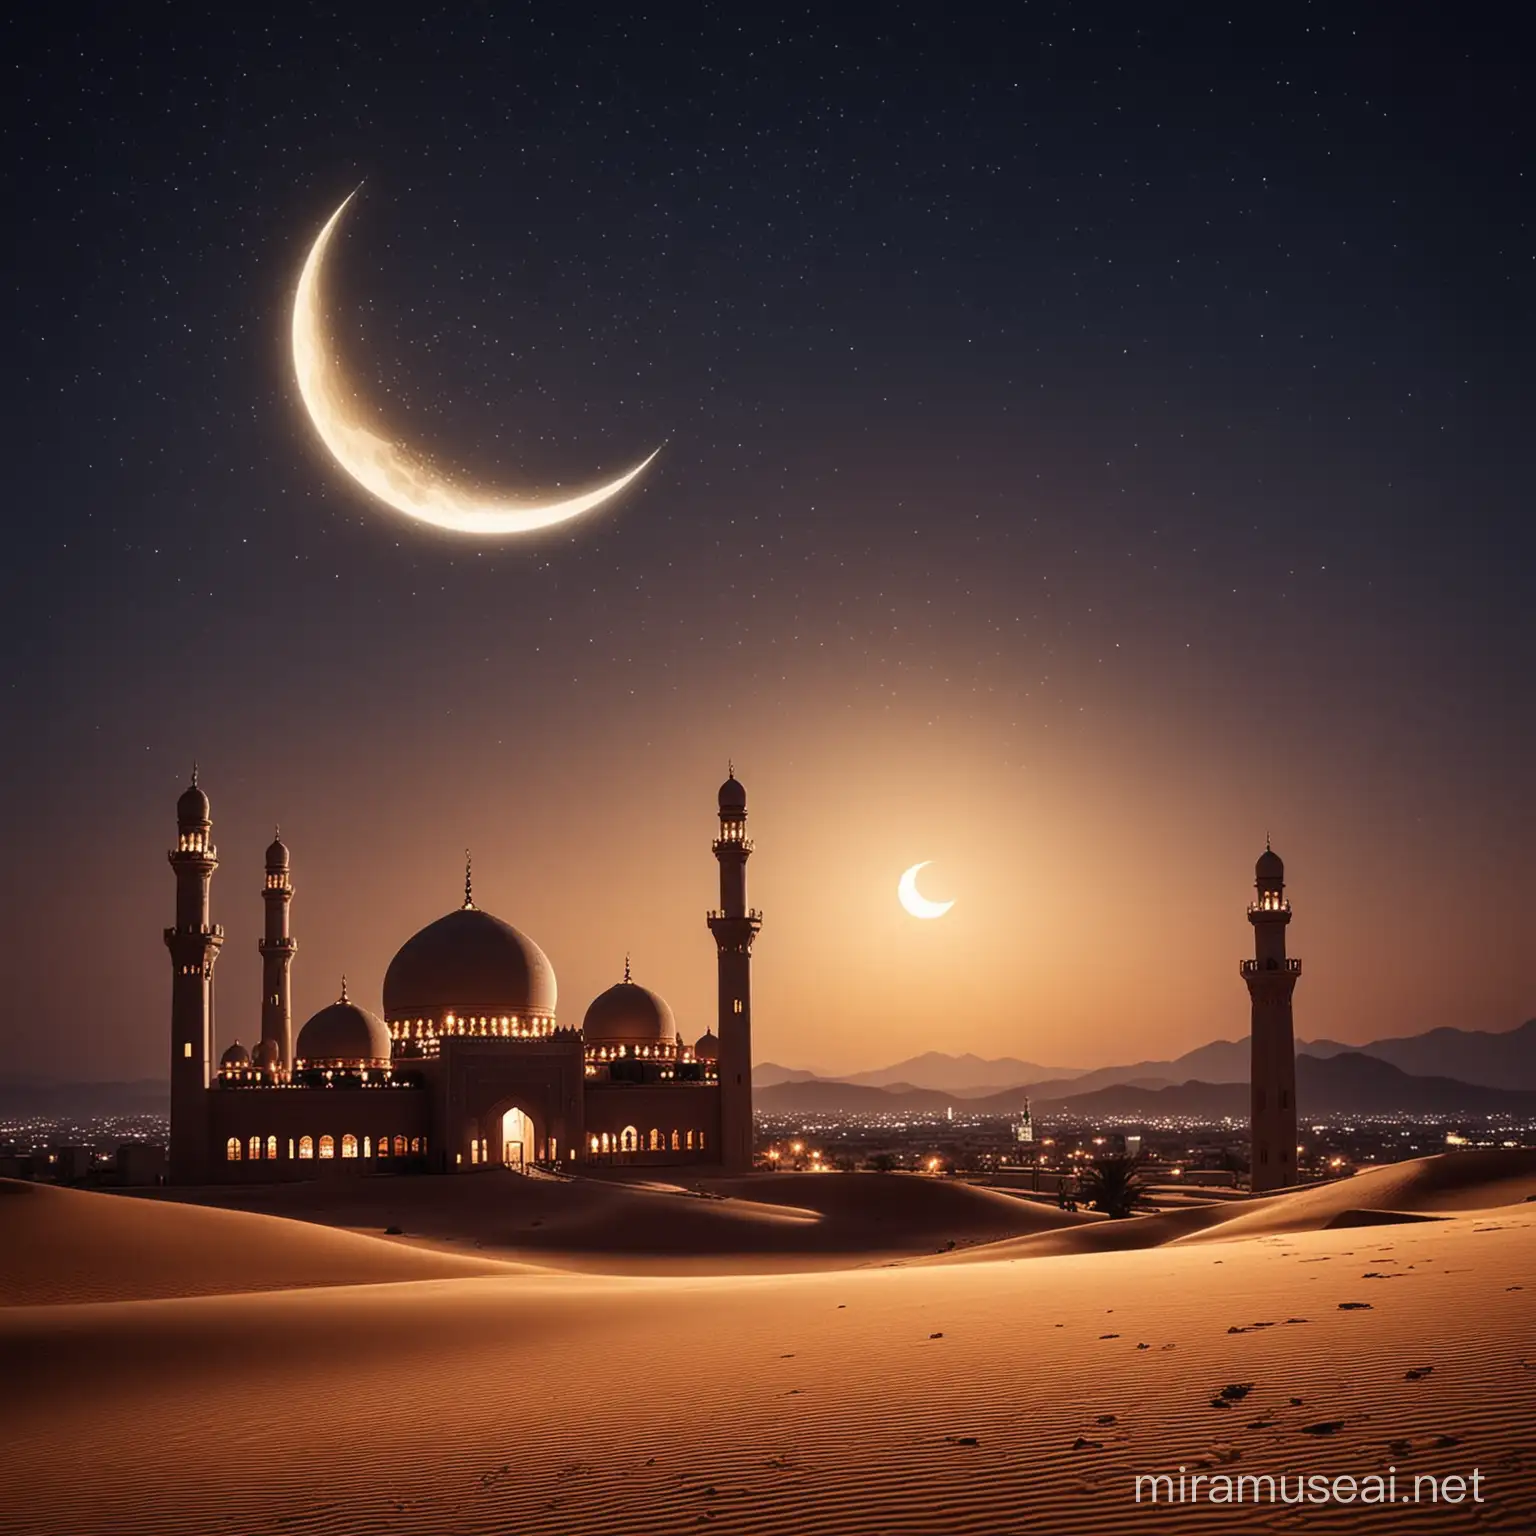 Eid mubarak mosque in night lit with the crescent moon in a desert